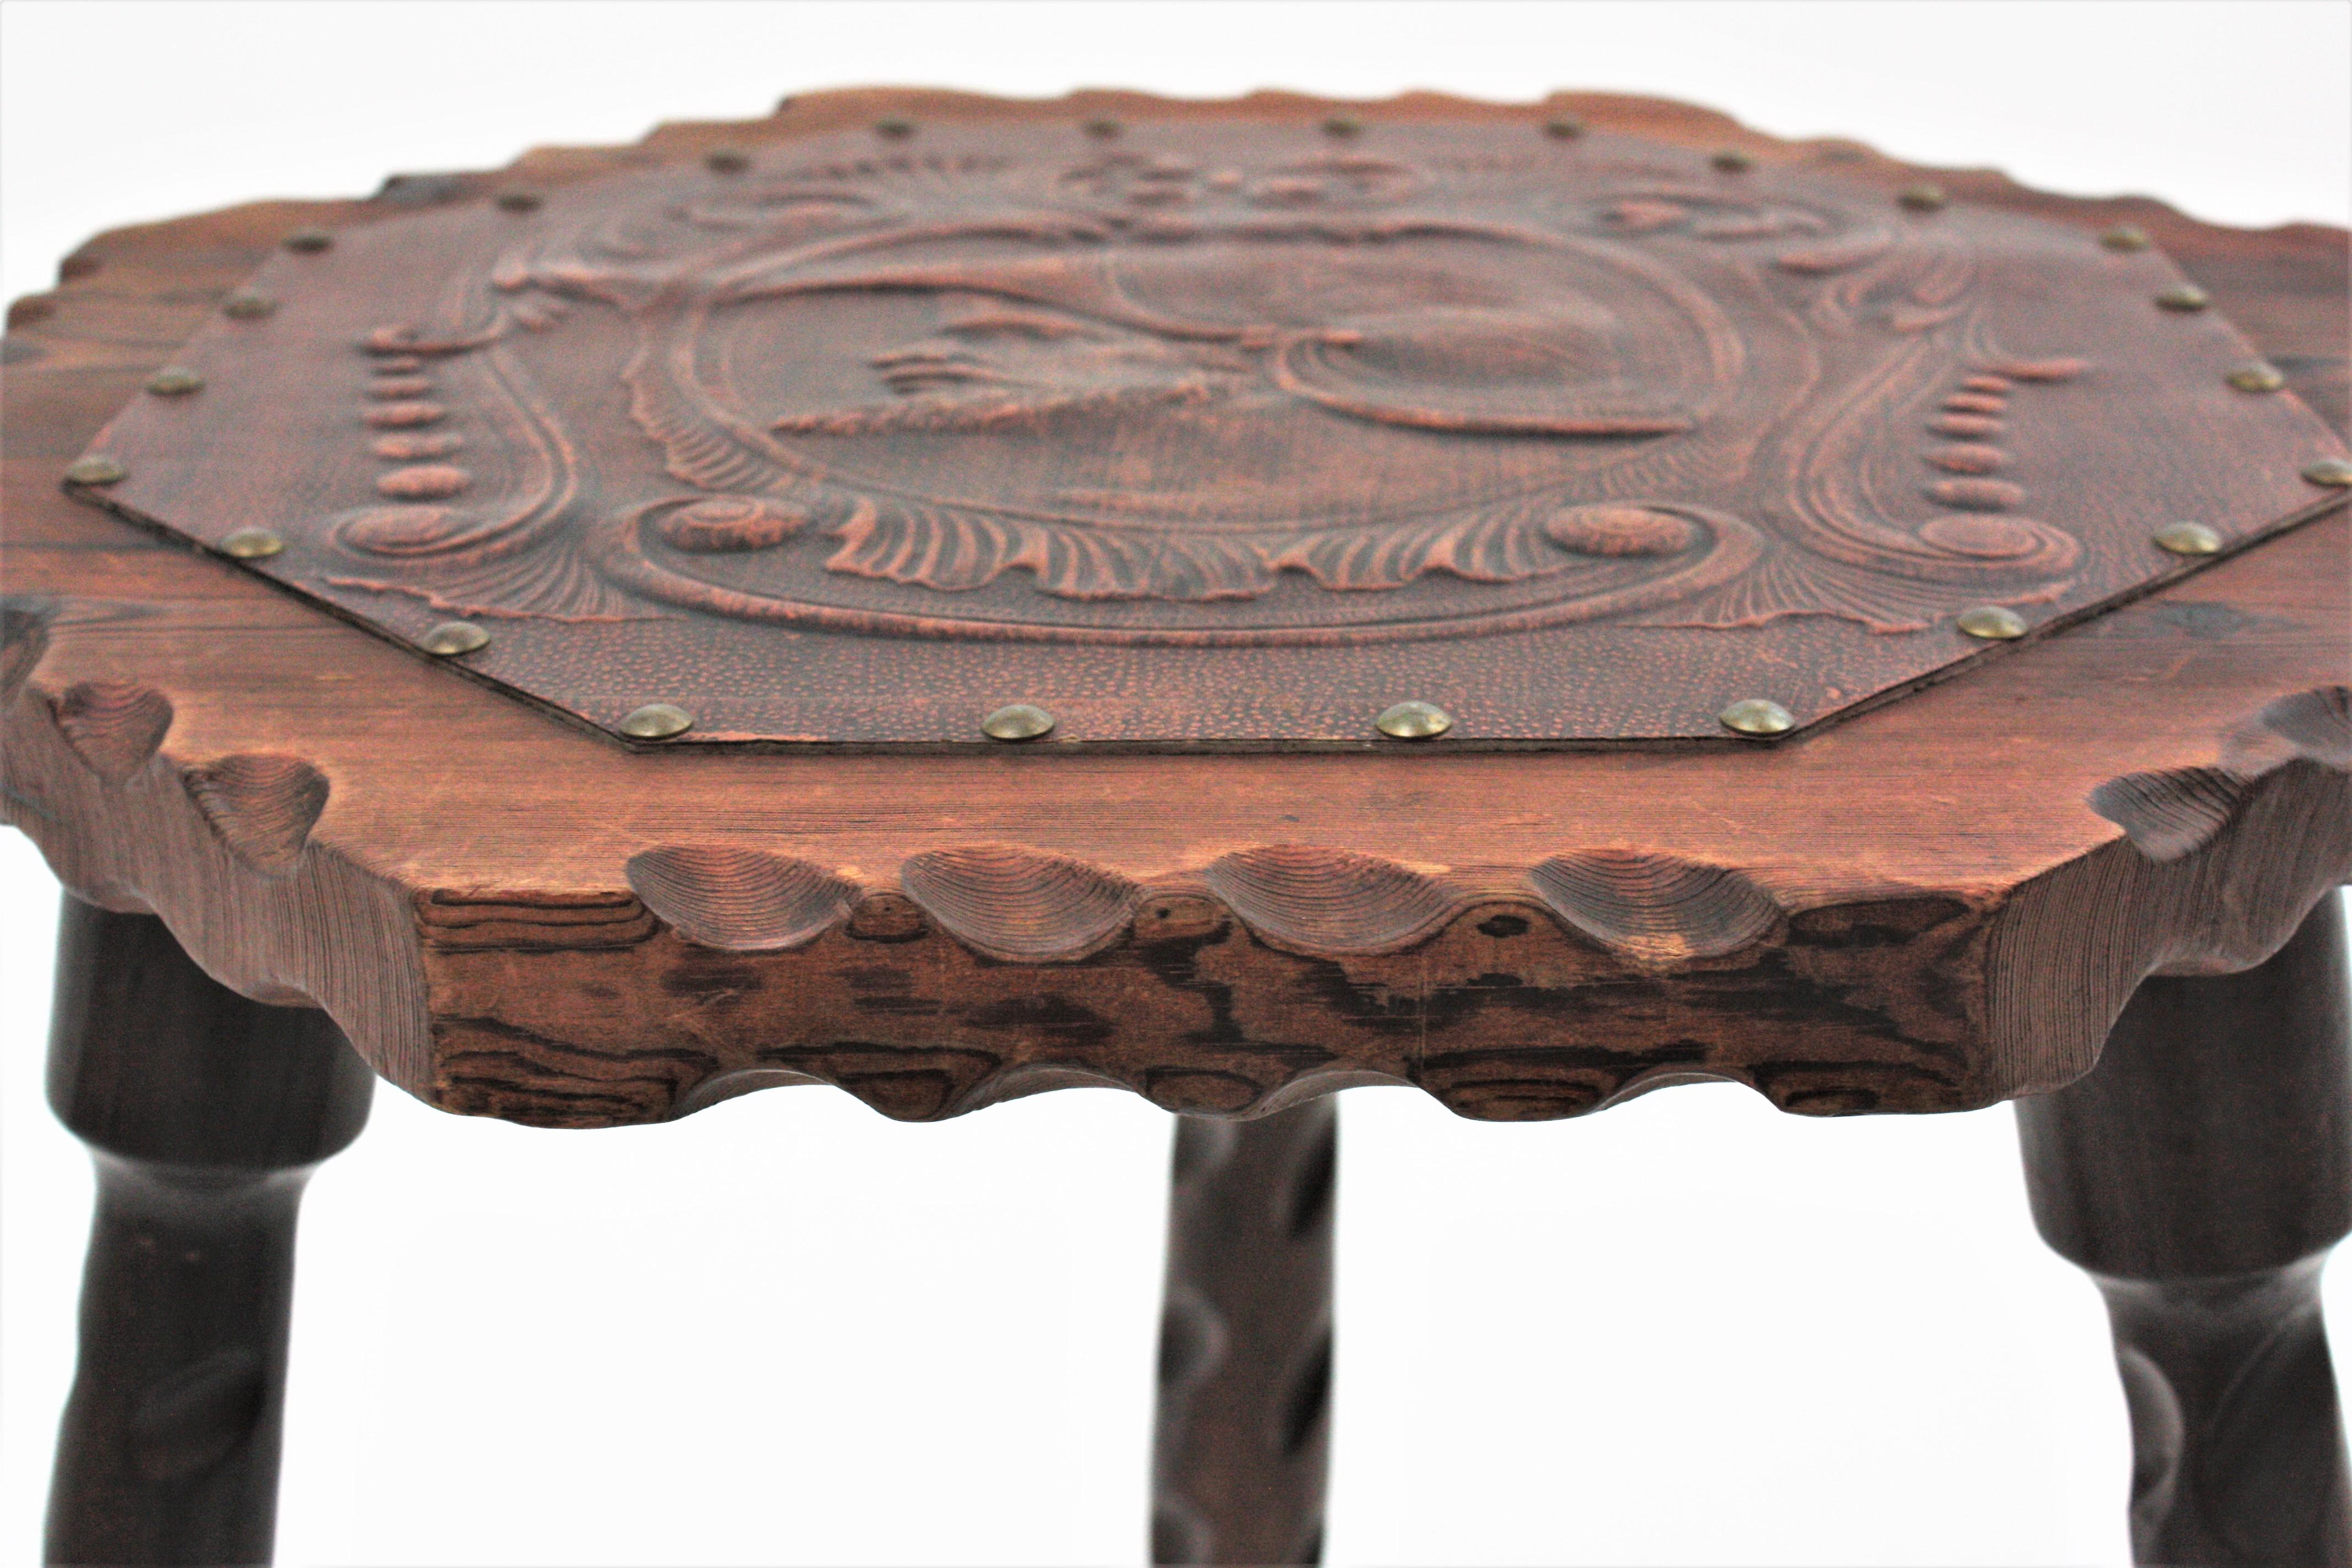 Two Spanish Colonial Hexagonal Tables in Carved Wood & Repousse Leather, 1940s For Sale 7